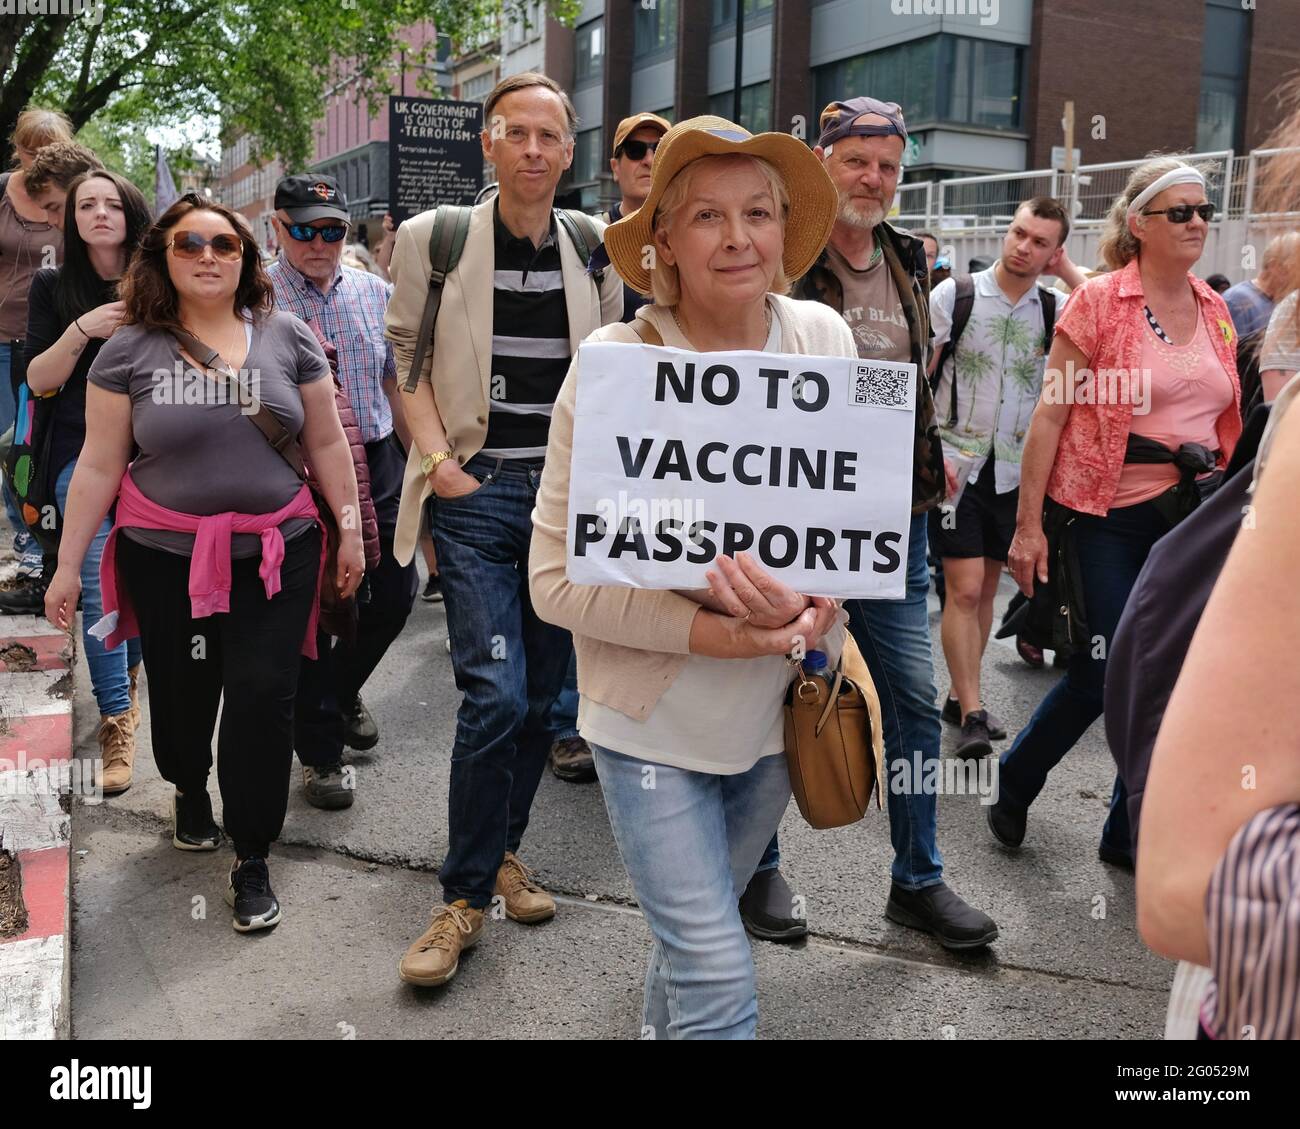 London, UK. 29/05/21. An anti-vaccine passport protester marches with a demonstration to denounce Covid government imposed restrictions. Stock Photo